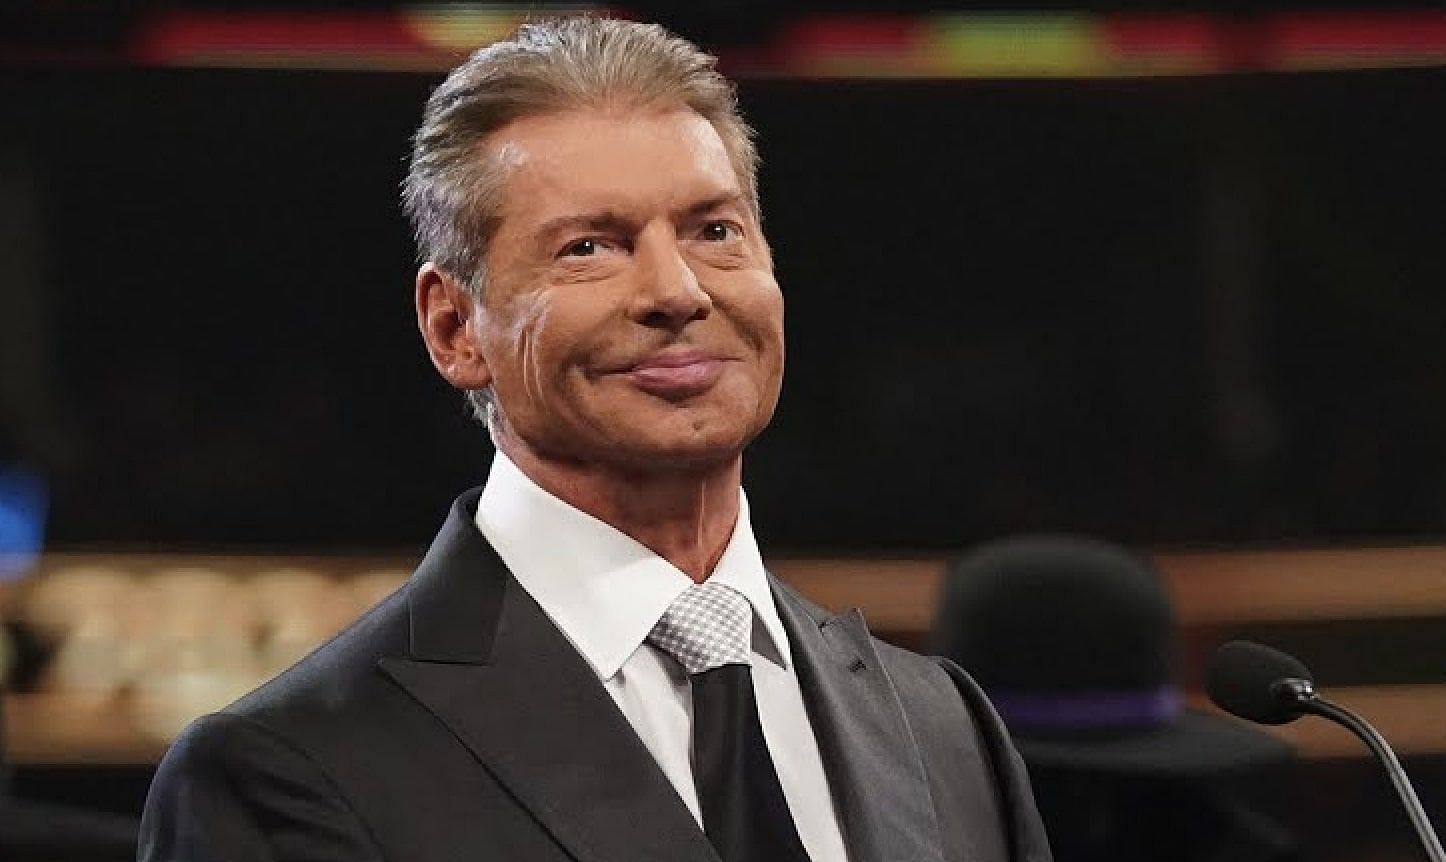 Vince McMahon announced his retirement from the company last month